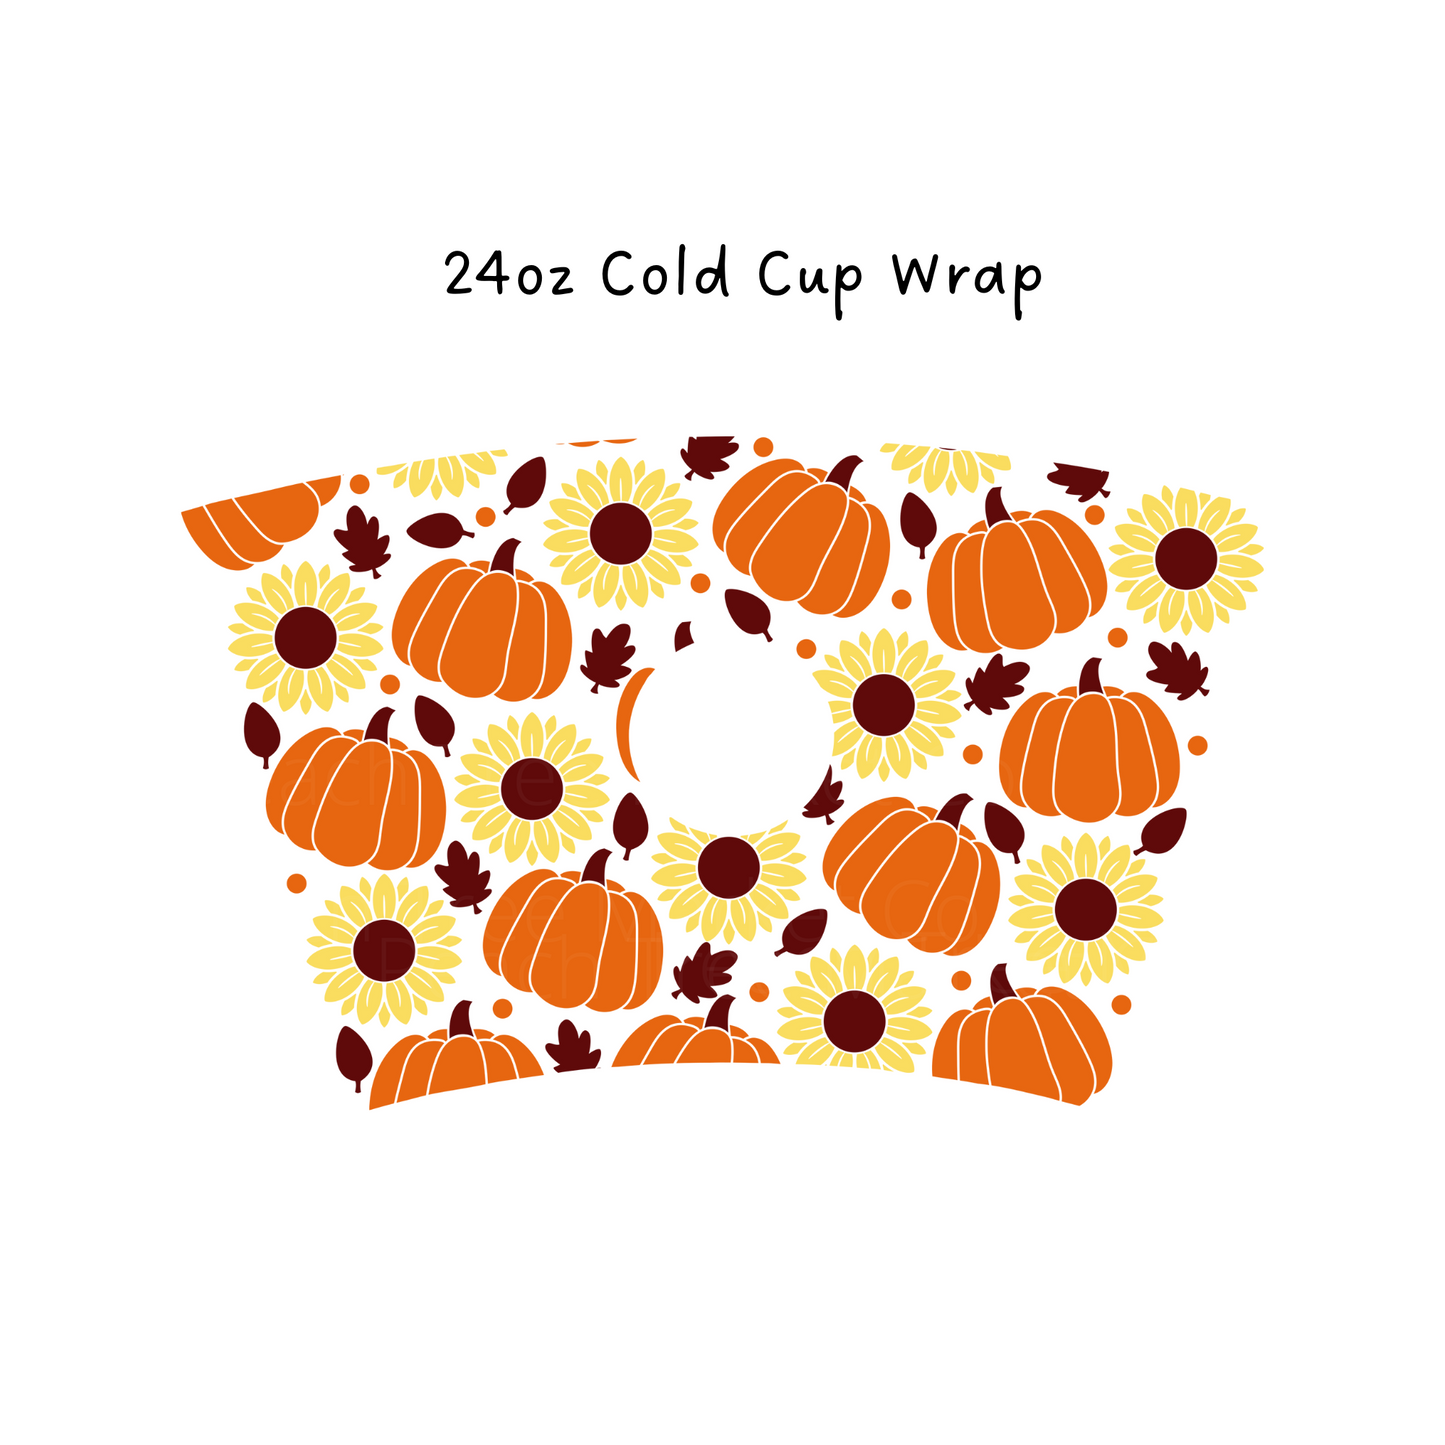 Sunflowers and Pumpkins 24 OZ Cold Cup Wrap